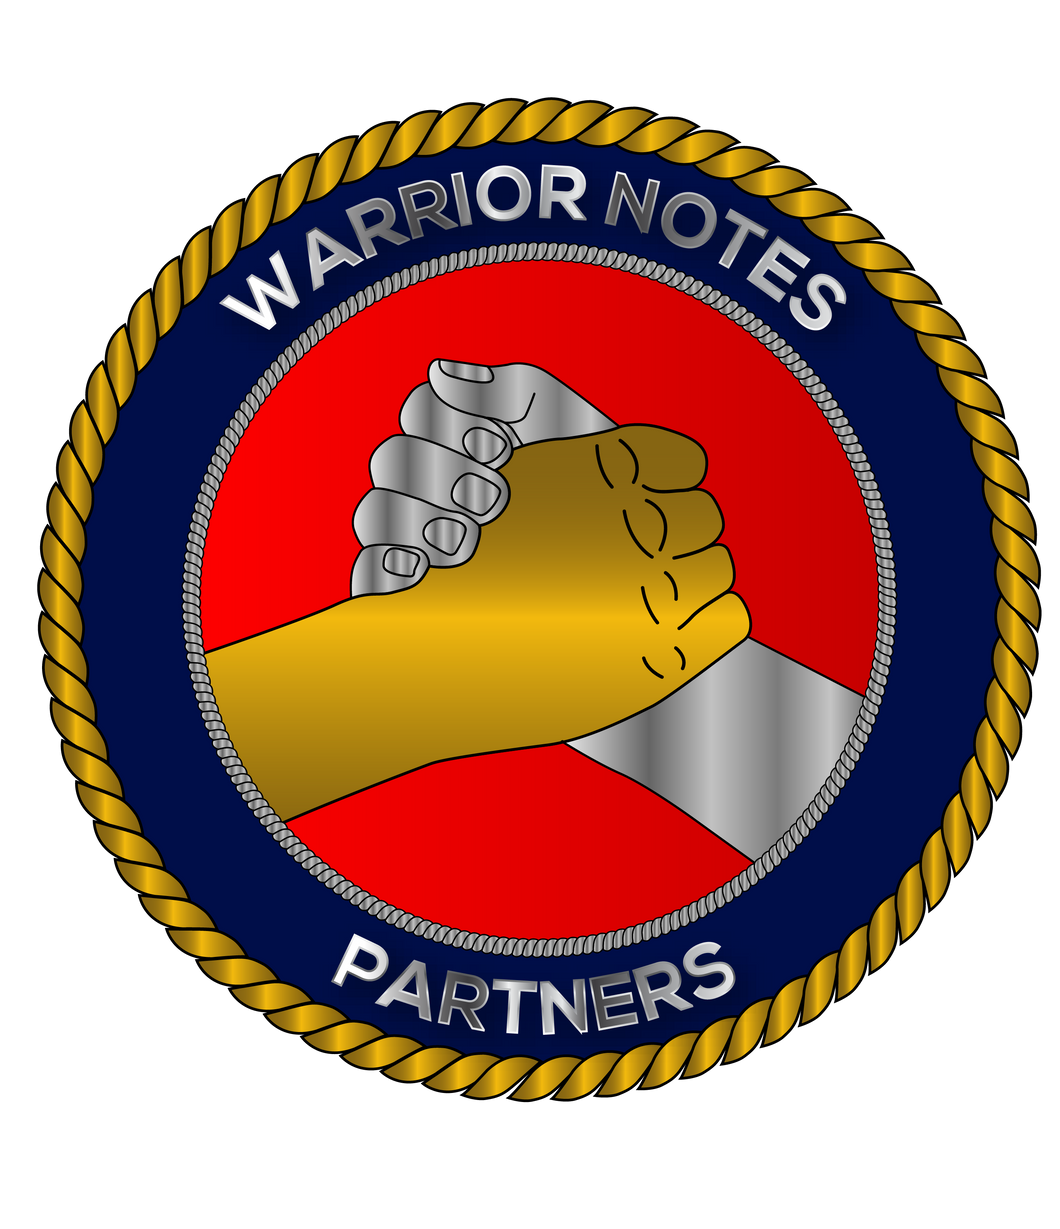 Warrior Notes: Partners- COIN